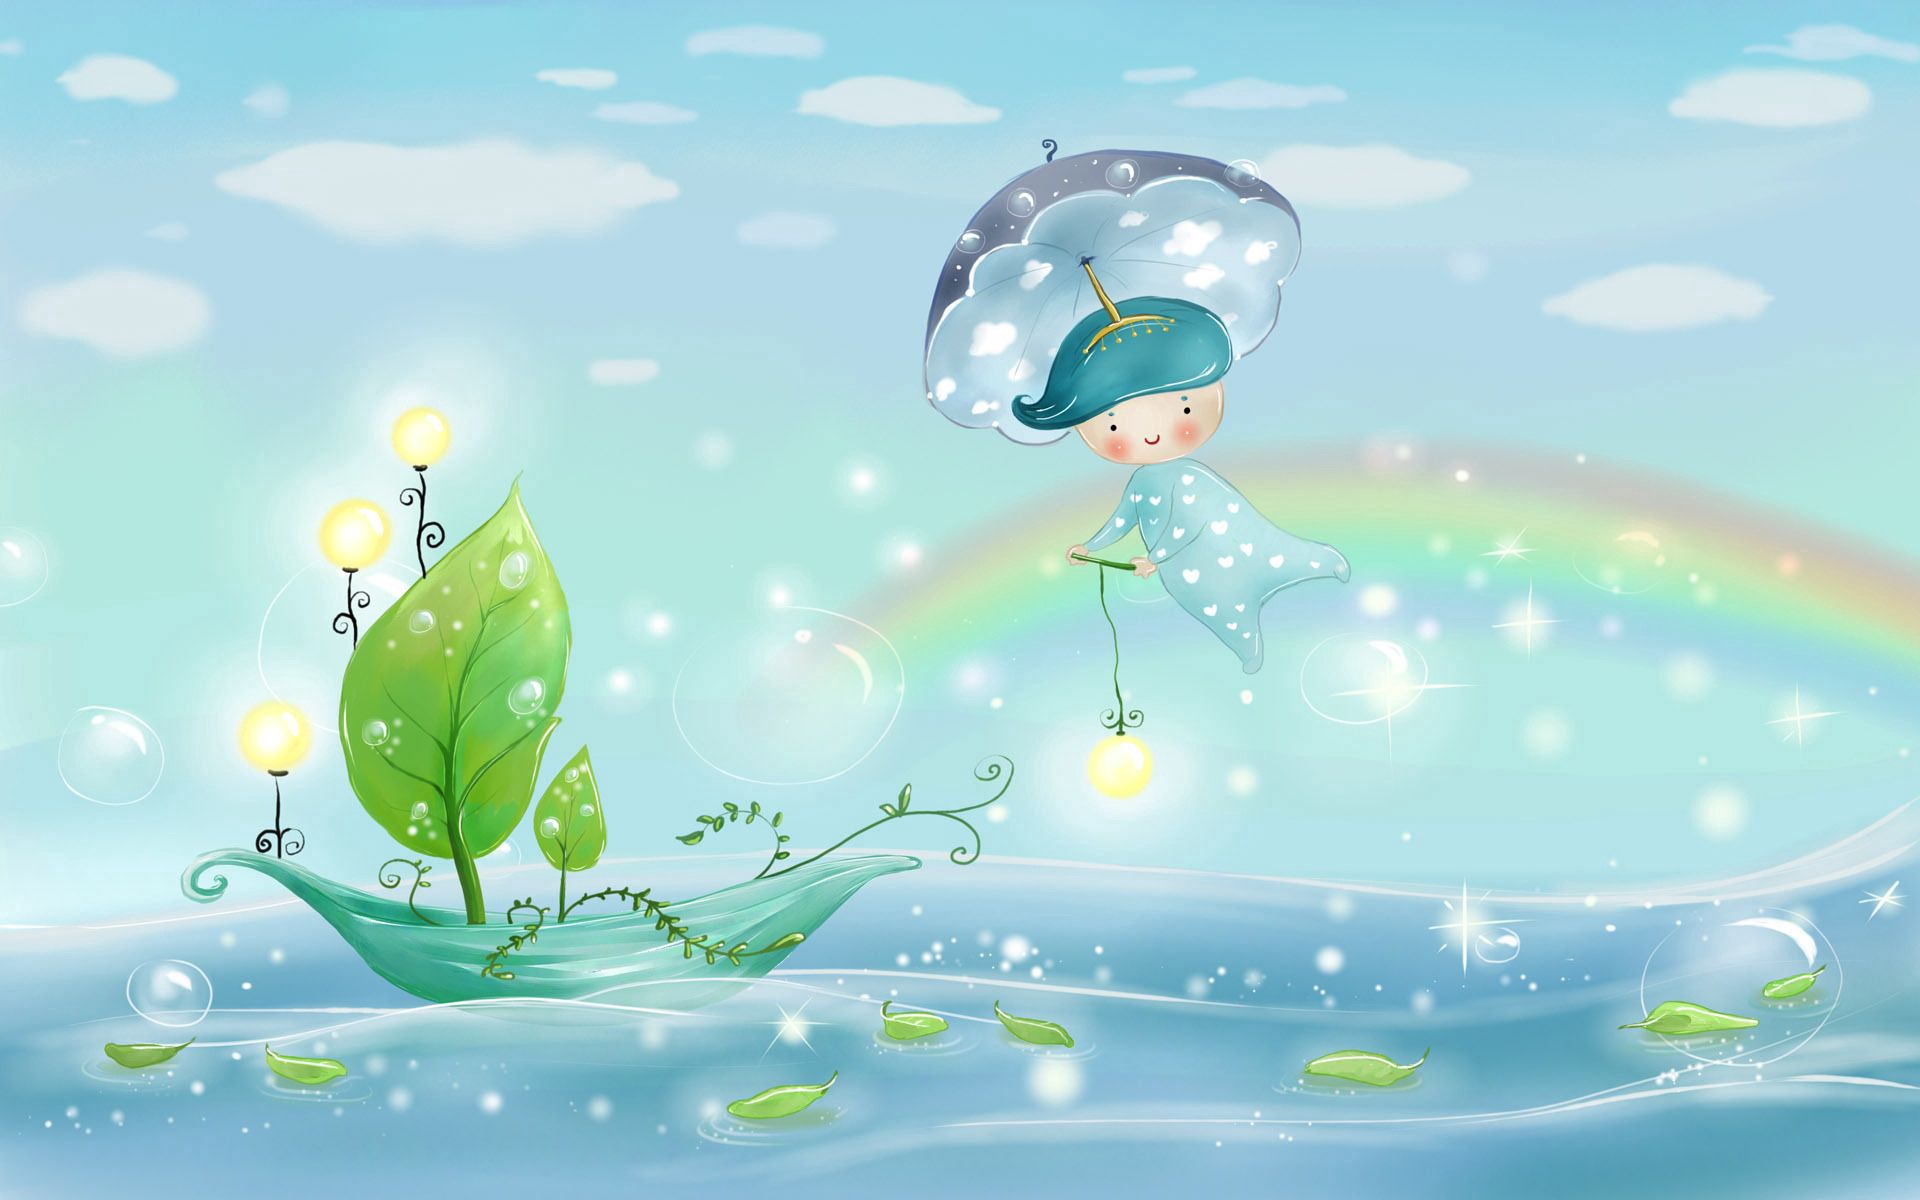 android bubbles, picture, nature, water, sky, leaves, rain, sea, clouds, rainbow, vector, lights, shine, light, lanterns, drawing, boat, sail, umbrella, boy, weather